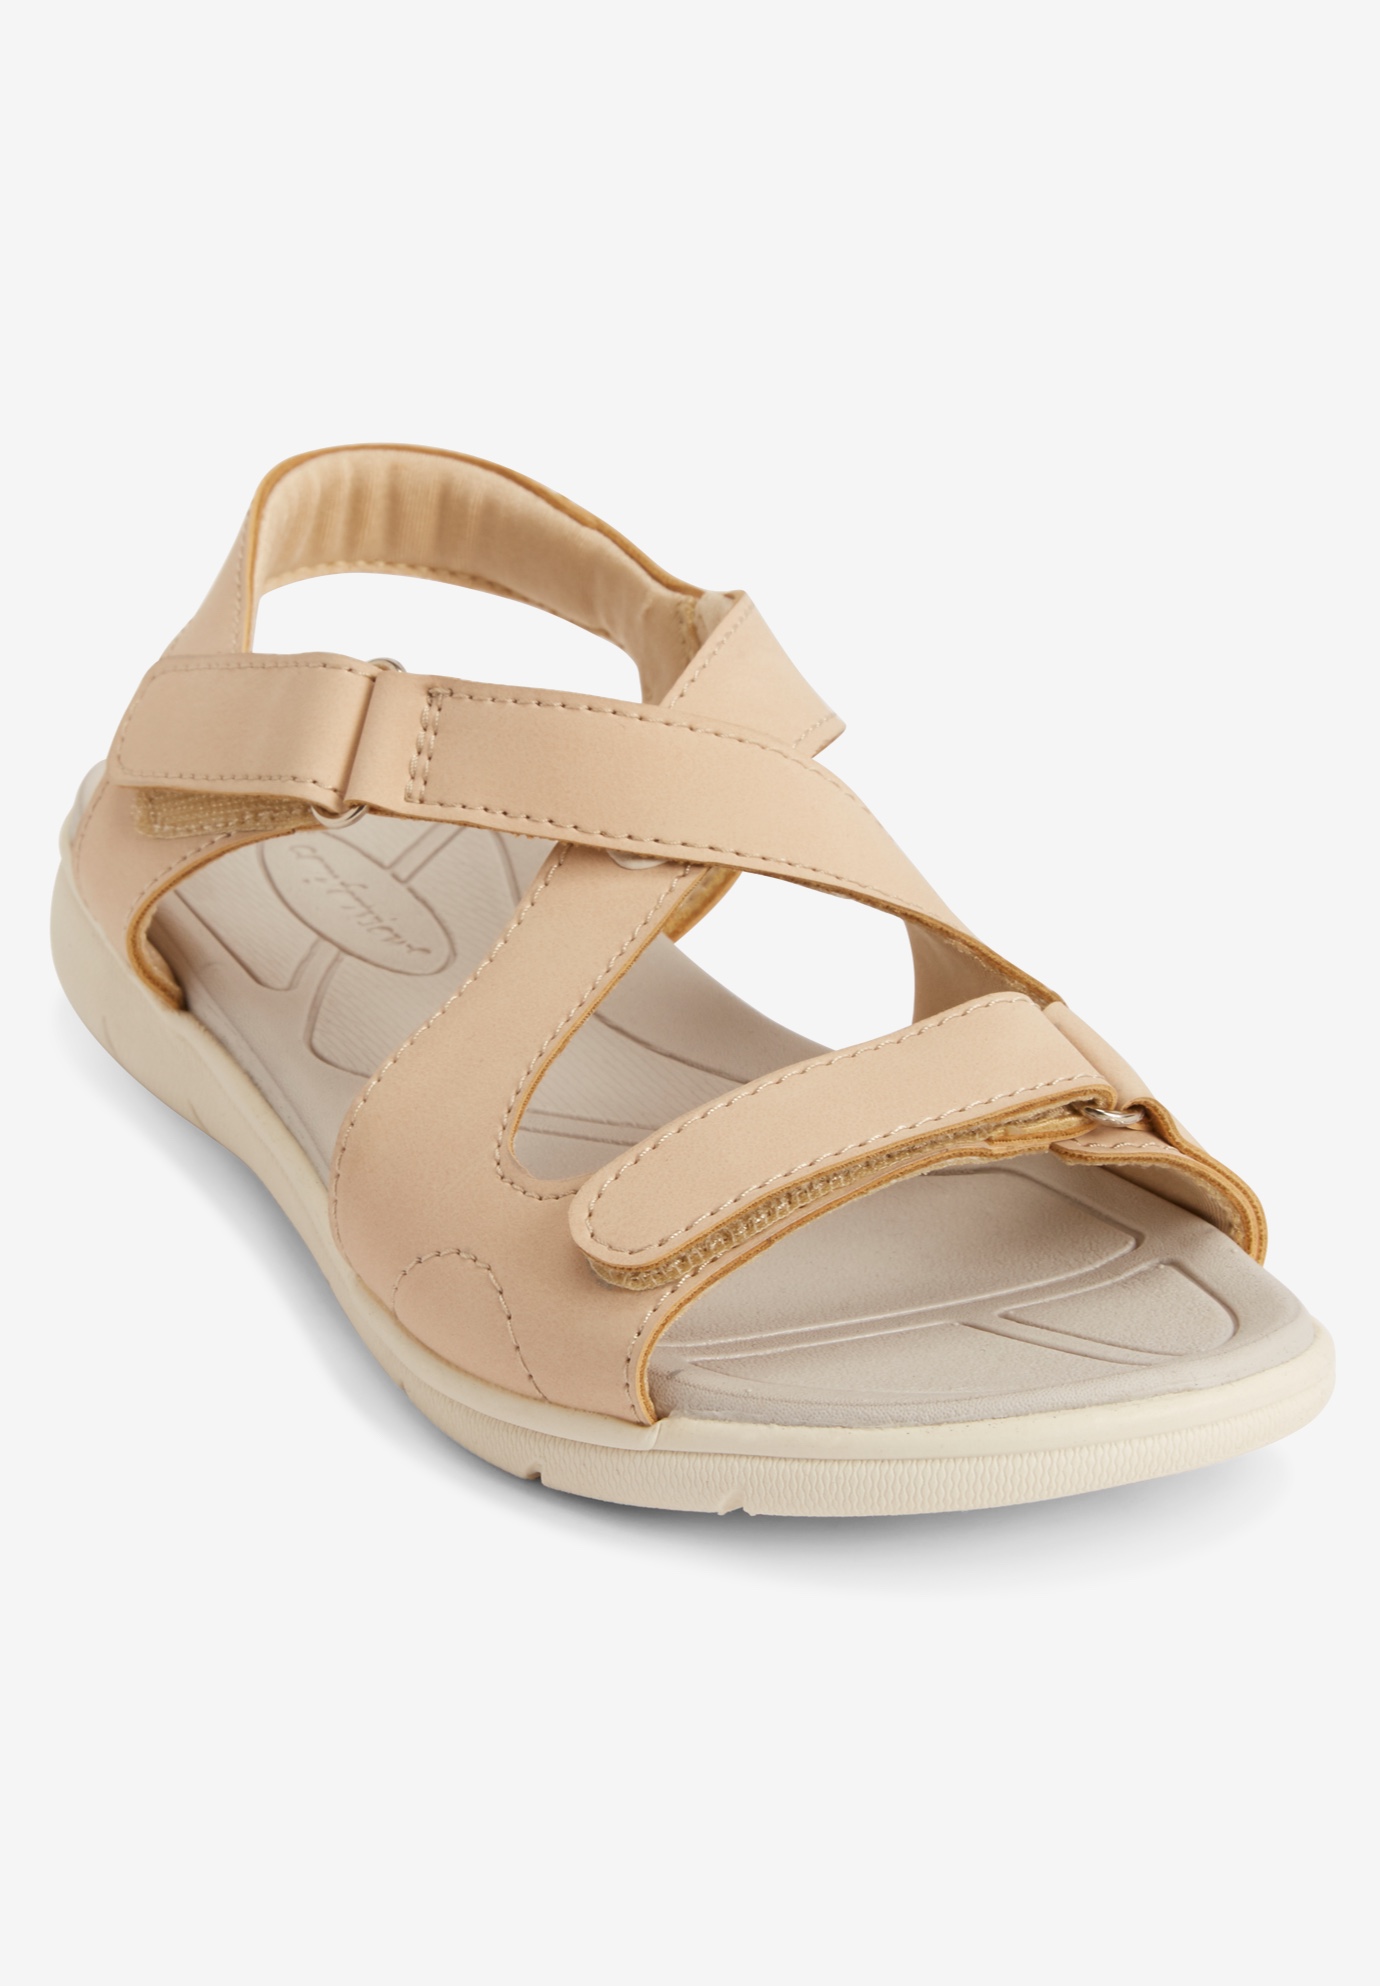 Sprællemand Inspicere Herske The Anouk Sandal | Woman Within